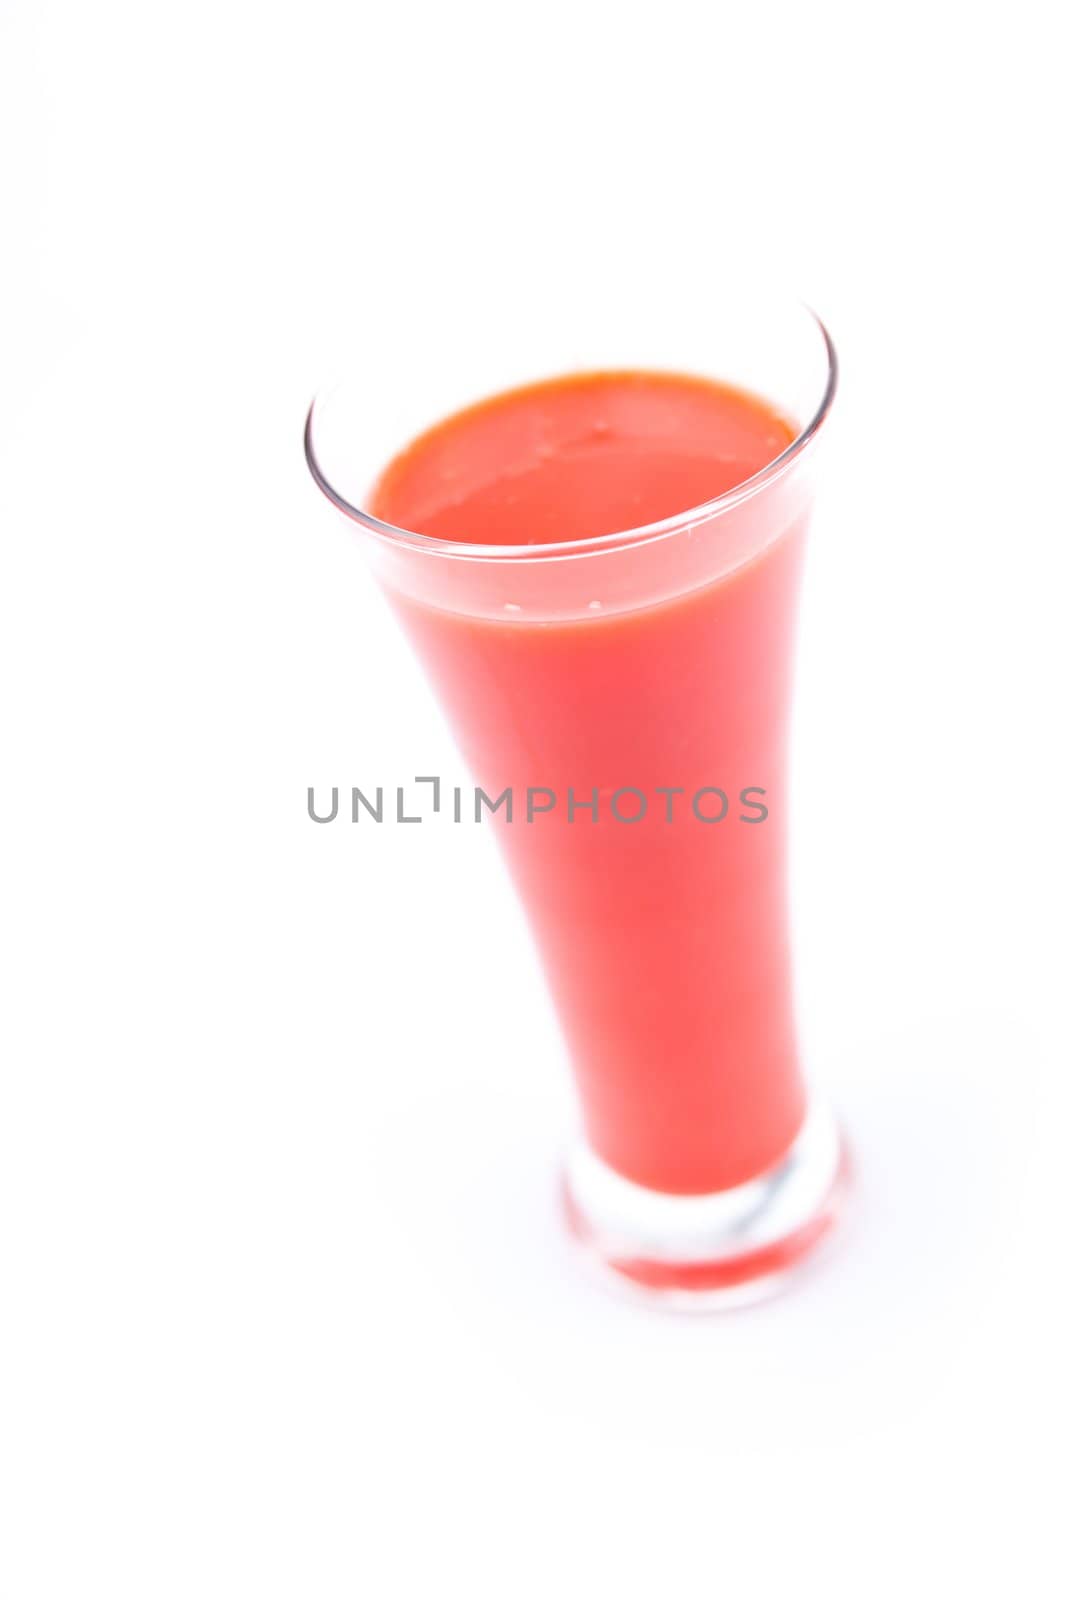 full glass of berries juice against white background